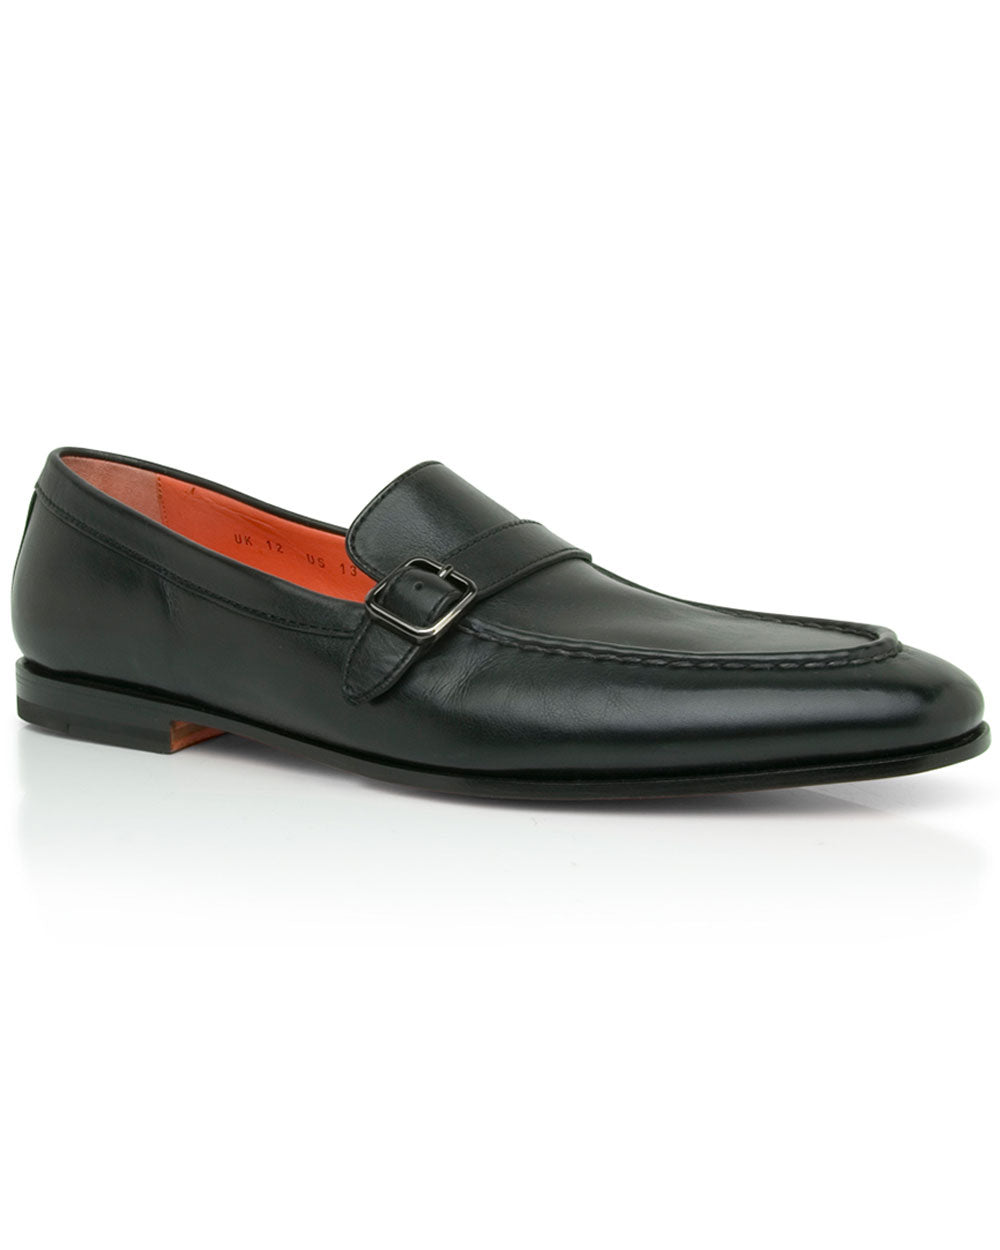 Donor Loafer in Black